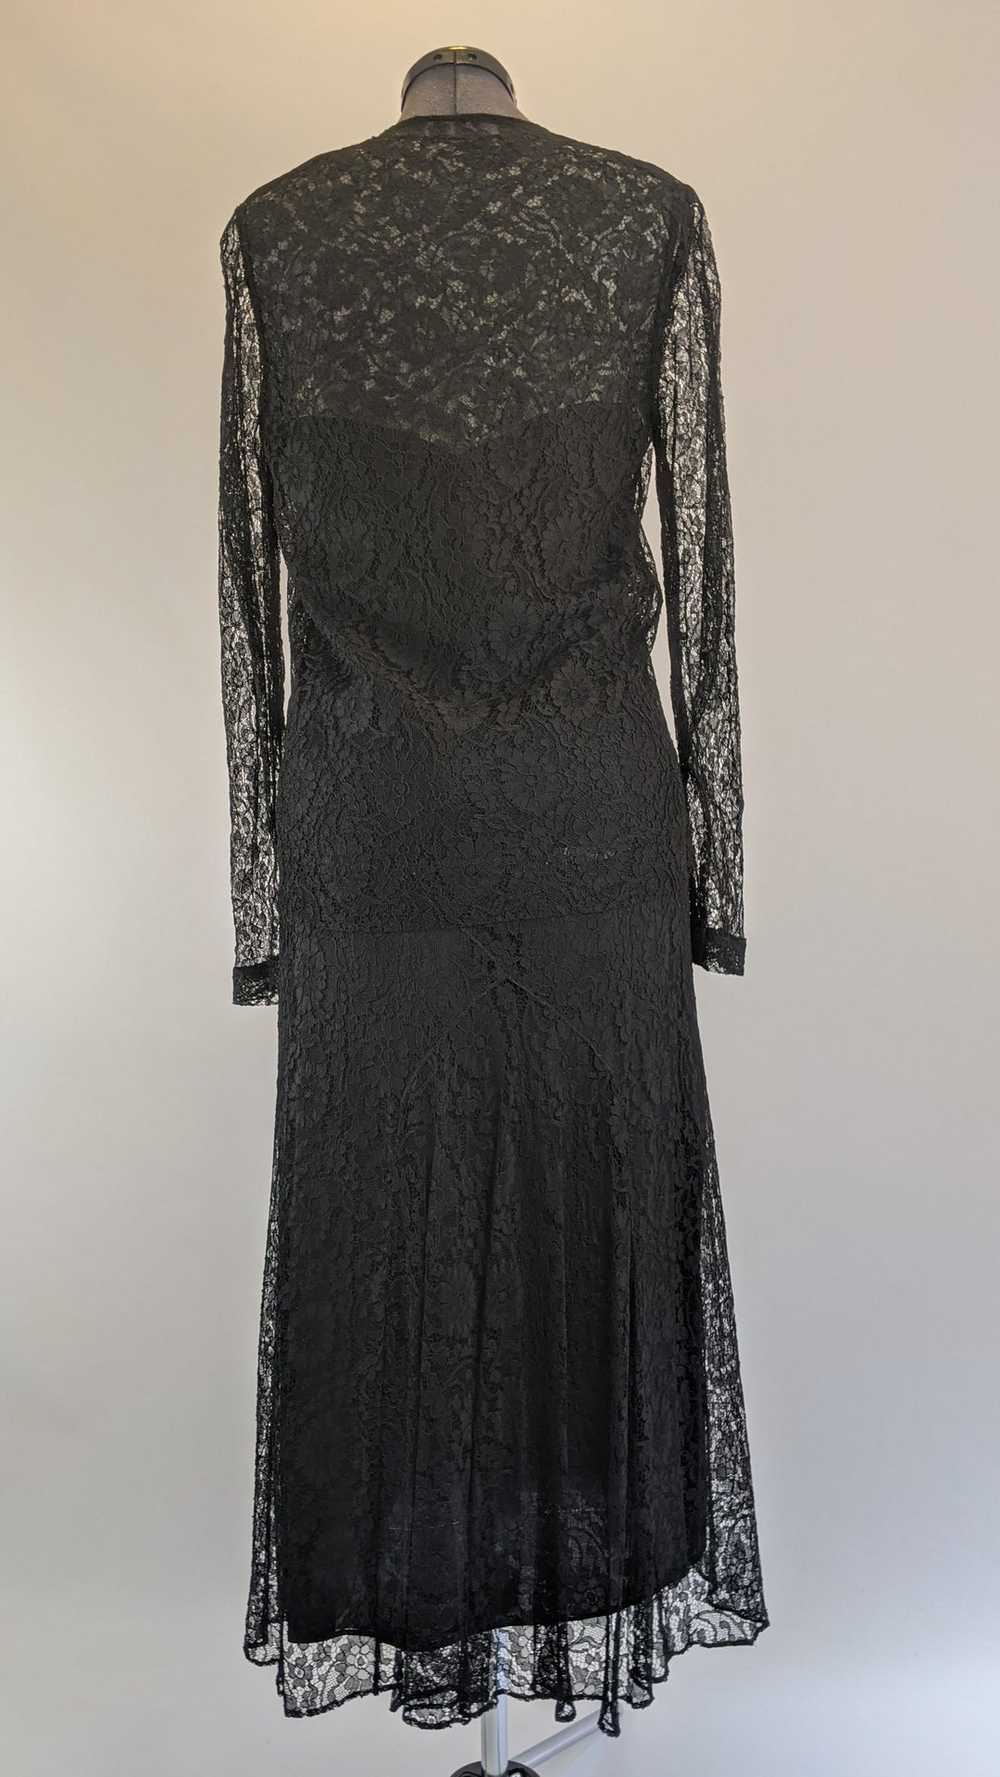 1930s Black Lace Long Sleeve Evening Gown - image 8